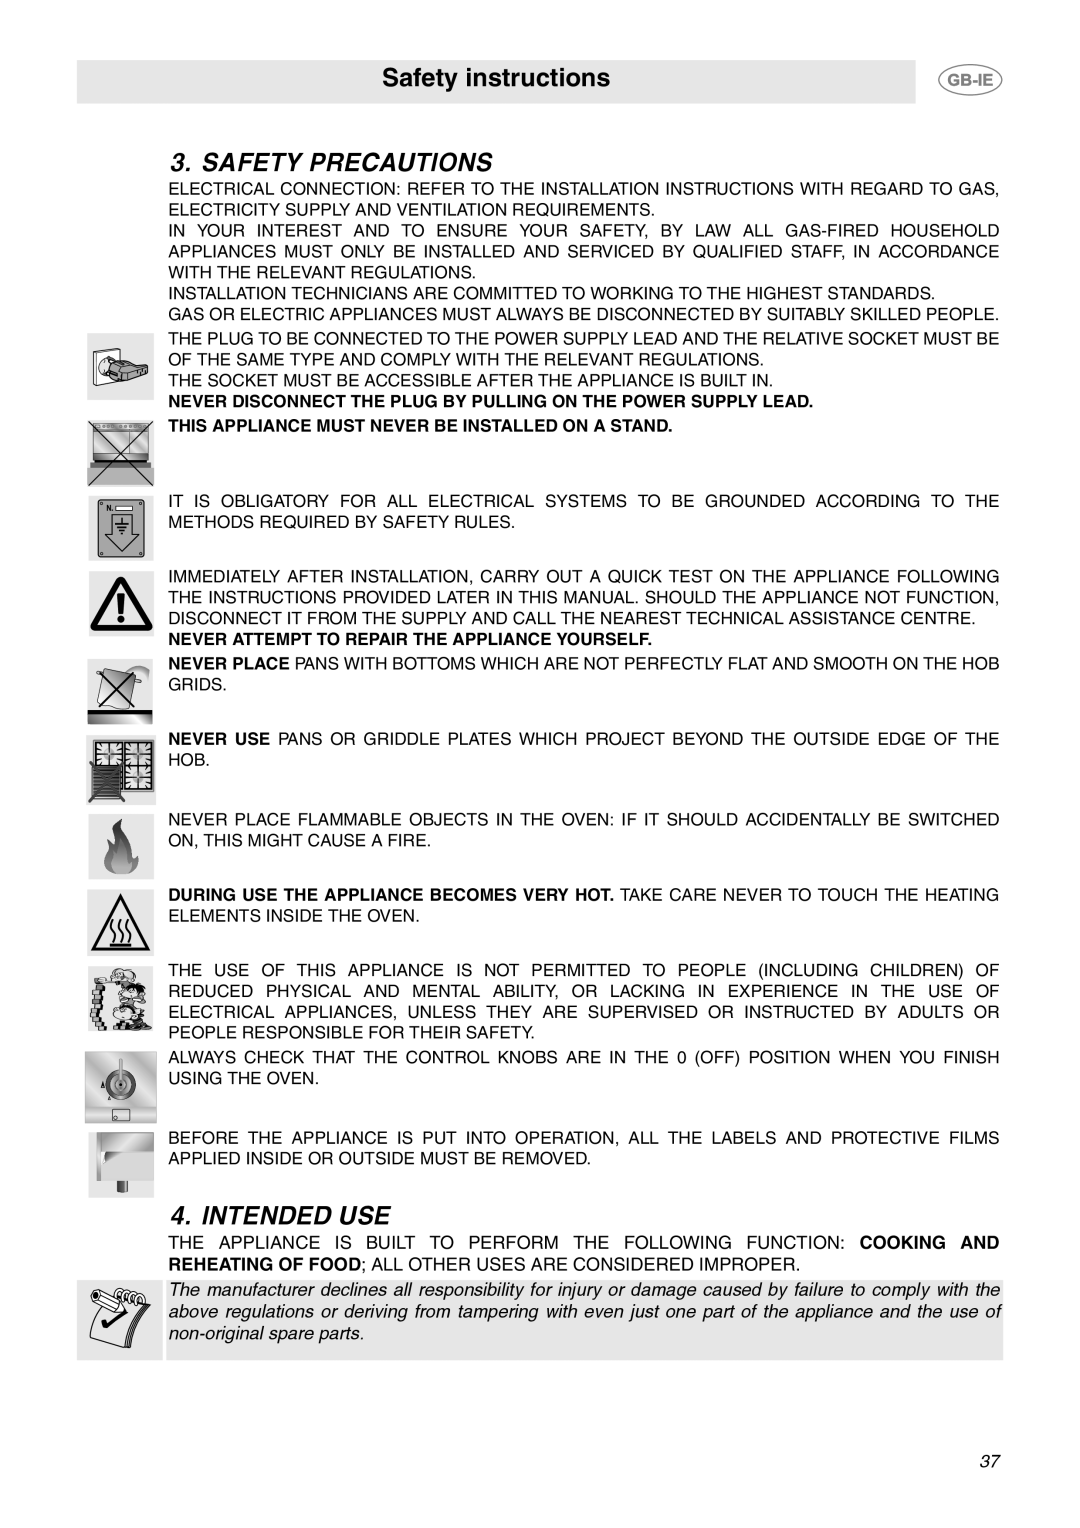 Smeg CE92GPX Safety instructions, Safety Precautions, Intended Use, This Appliance Must Never Be Installed On A Stand 